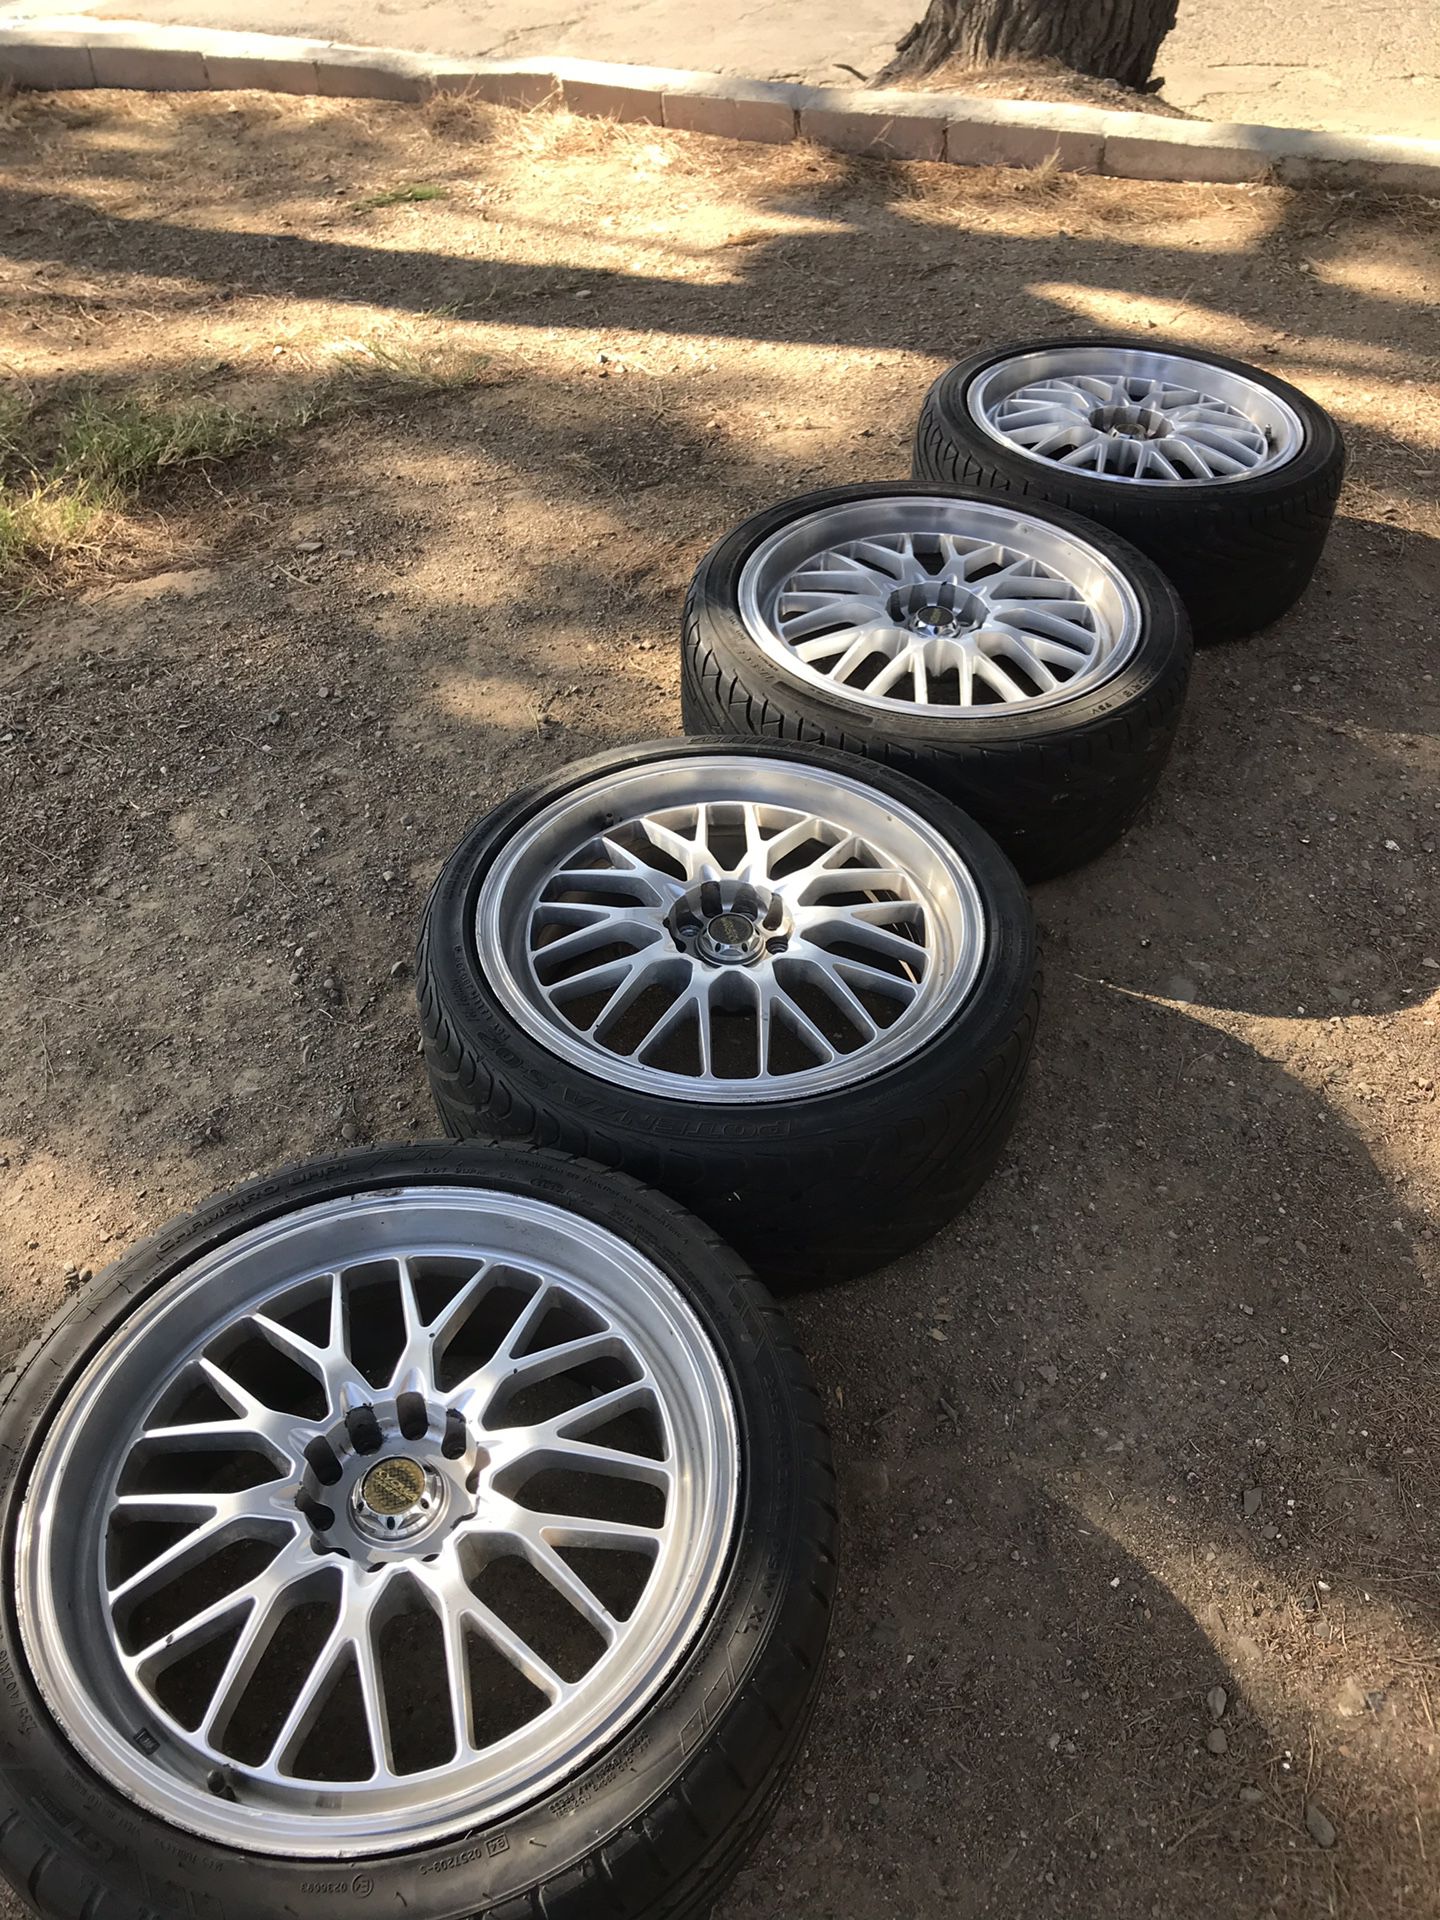 17 inch rims 5x114 5x114.3 Acura , Volkswagen and prolly more